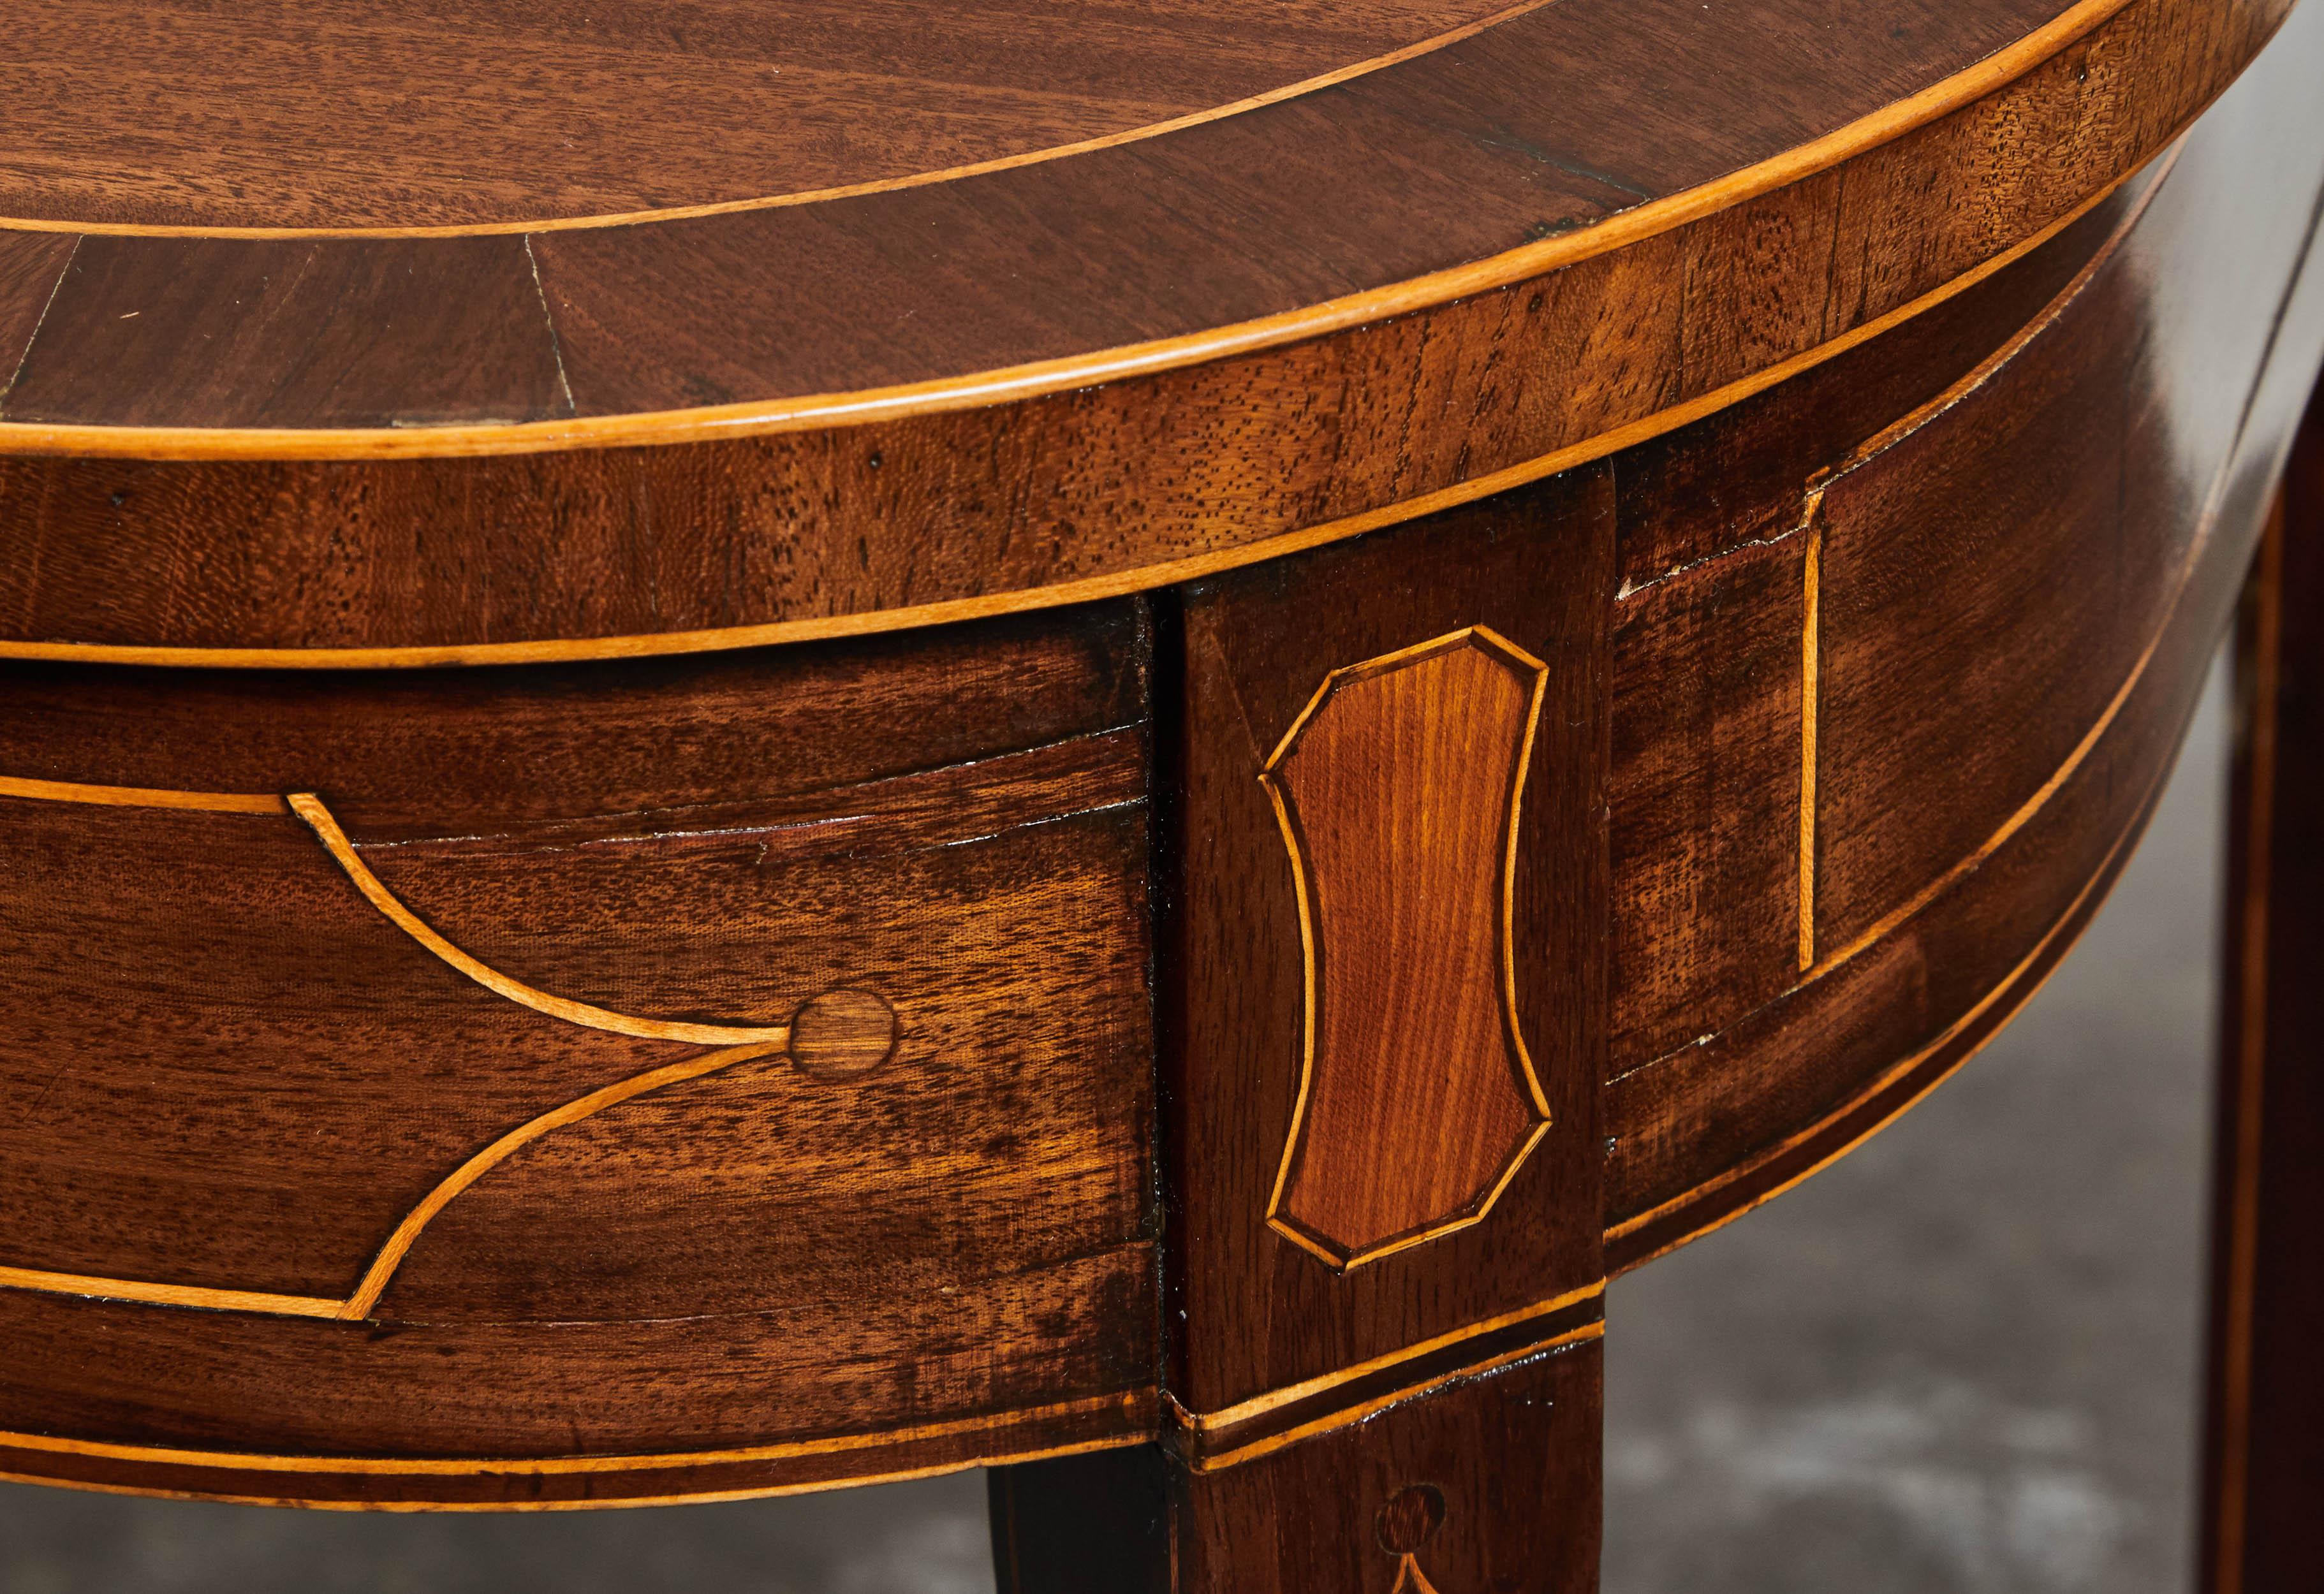 A handsome 19th century English mahogany inlaid console table featuring an inlaid squared tapered set of feet.